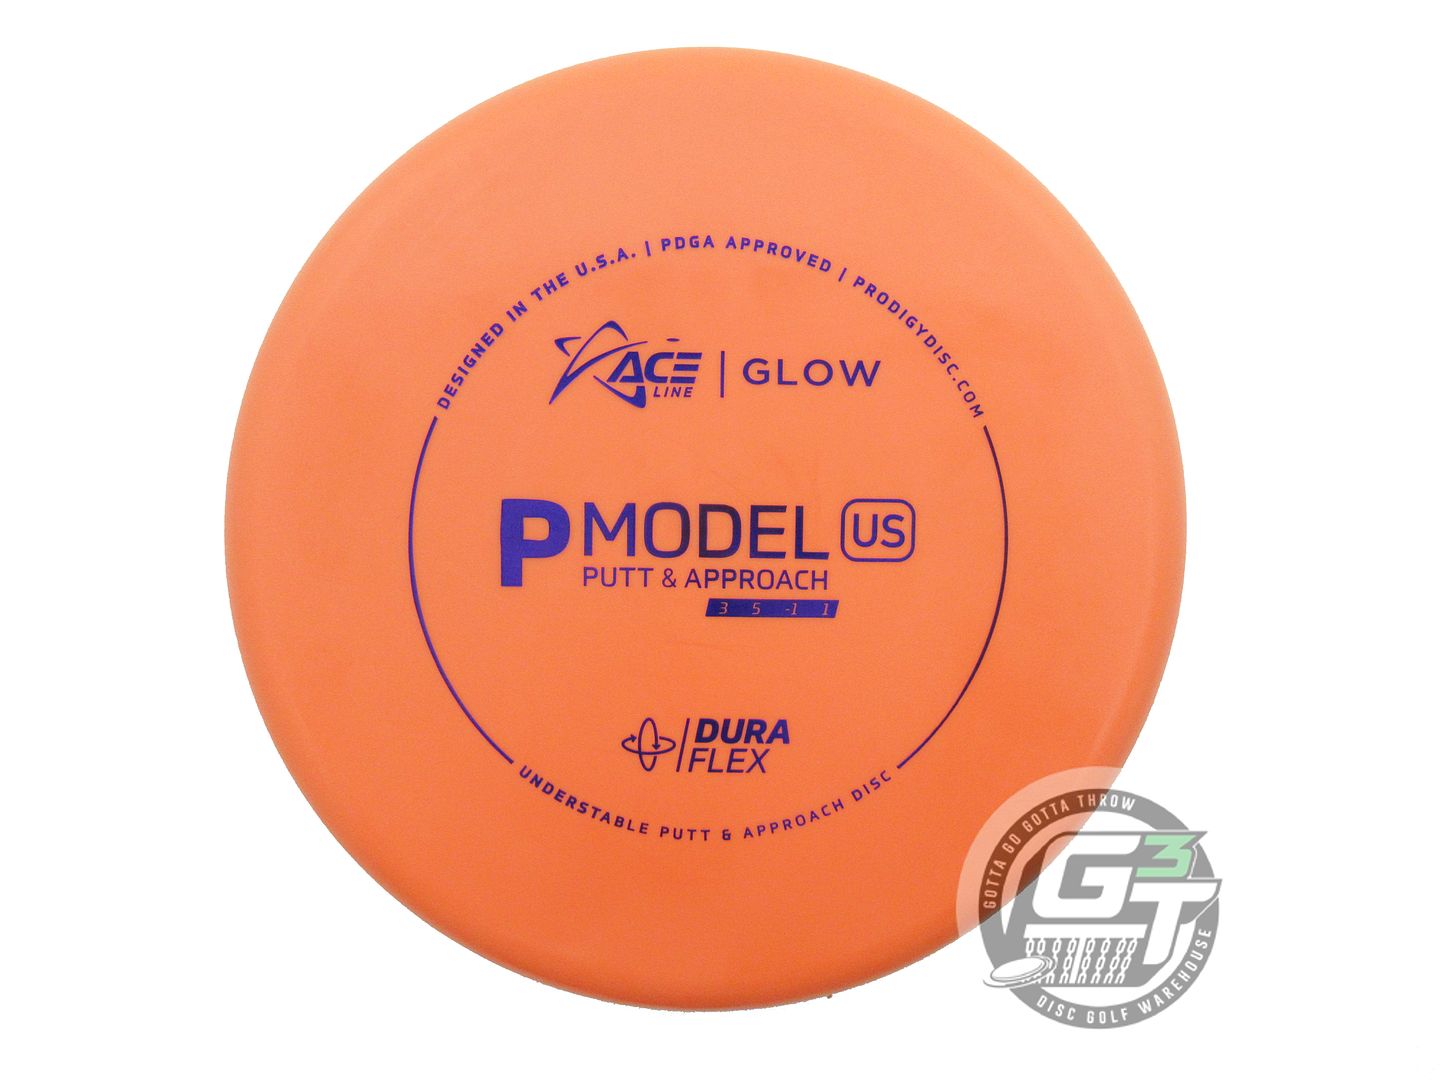 Prodigy Ace Line Glow DuraFlex P Model US Putter Golf Disc (Individually Listed)